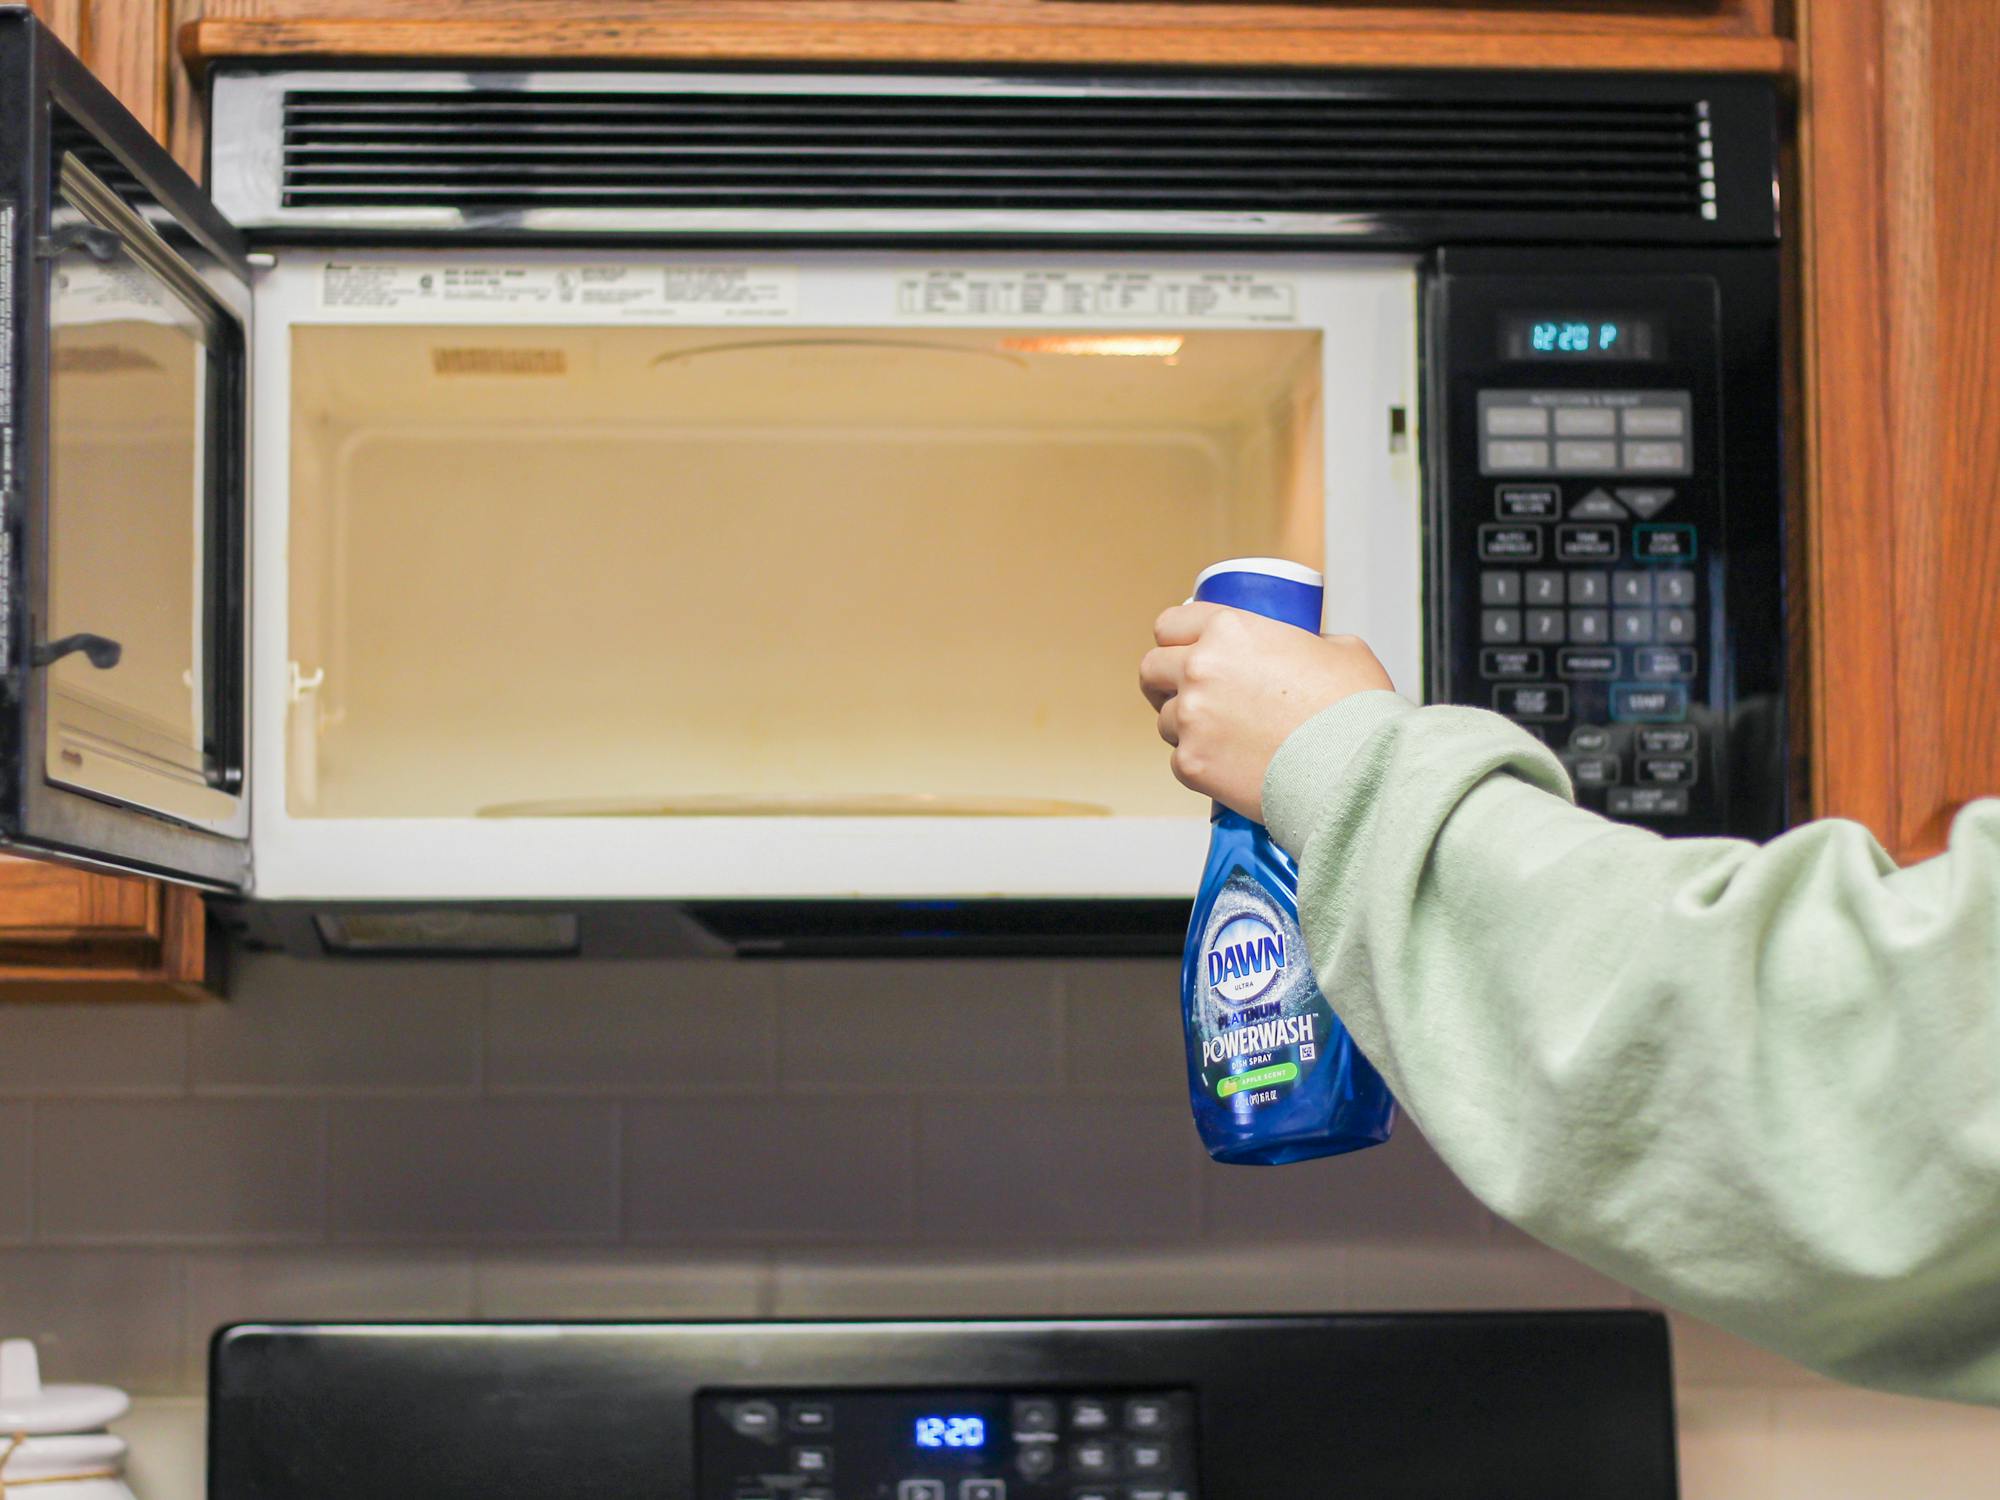 a person spraying dish soap into a microwave